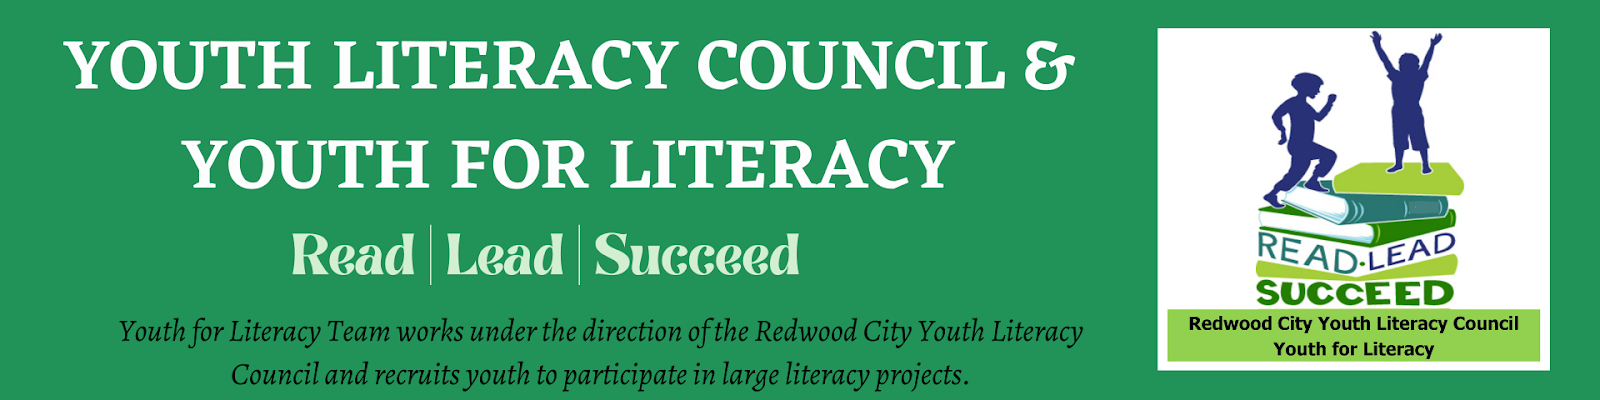 Youth Literacy Council and Youth for Literacy -                                 Read, Lead, Succeed